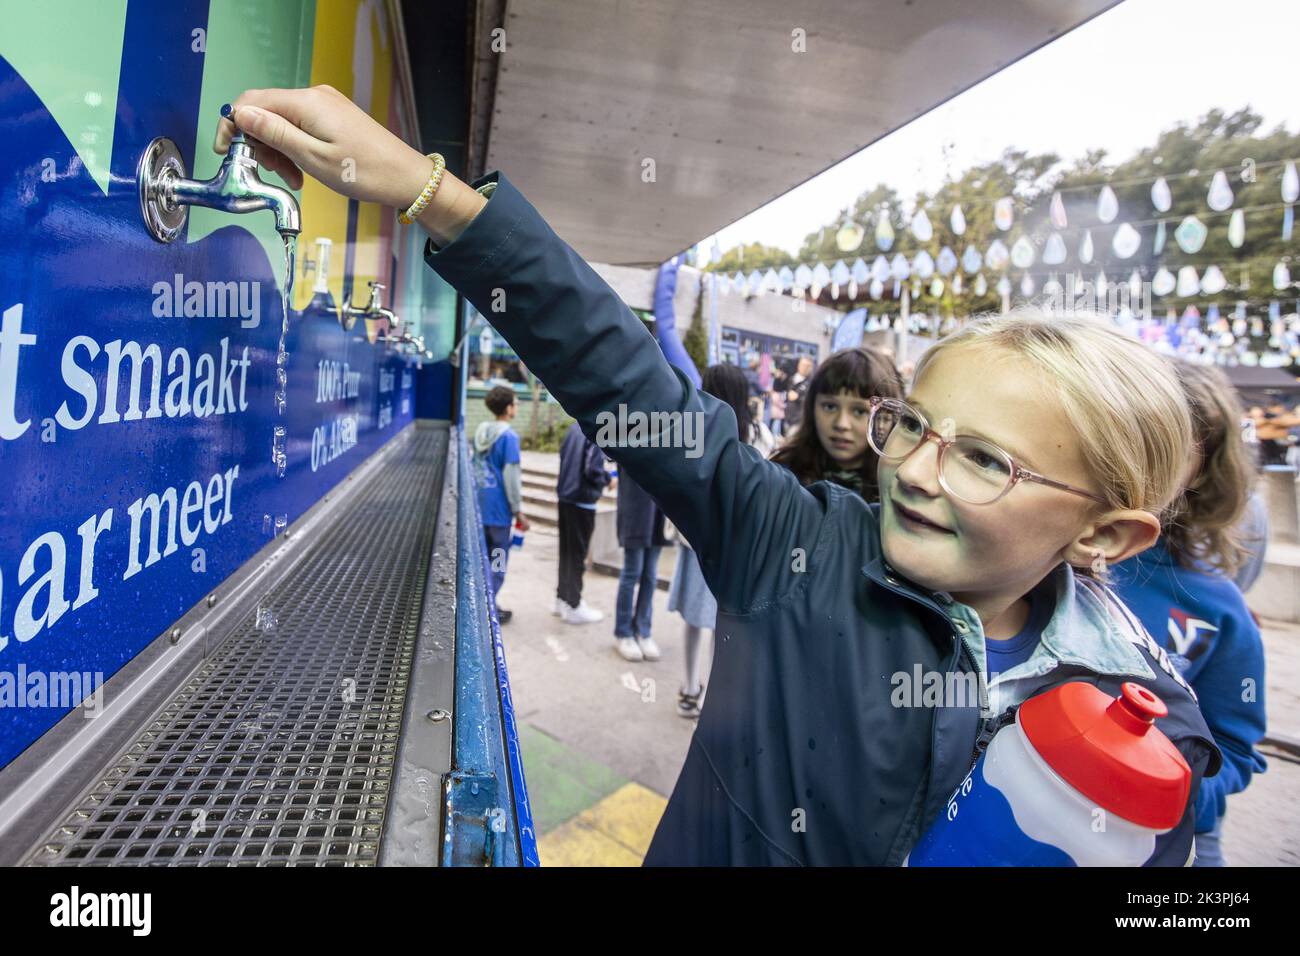 2022-09-28 09:00:35 GRONINGEN - Children tap drinking water during the opening of National Tap Water Day. This school day of approximately 250,000 primary school students is dominated by quandary water policy. ANP VINCENT JANNINK netherlands out - belgium out Stock Photo